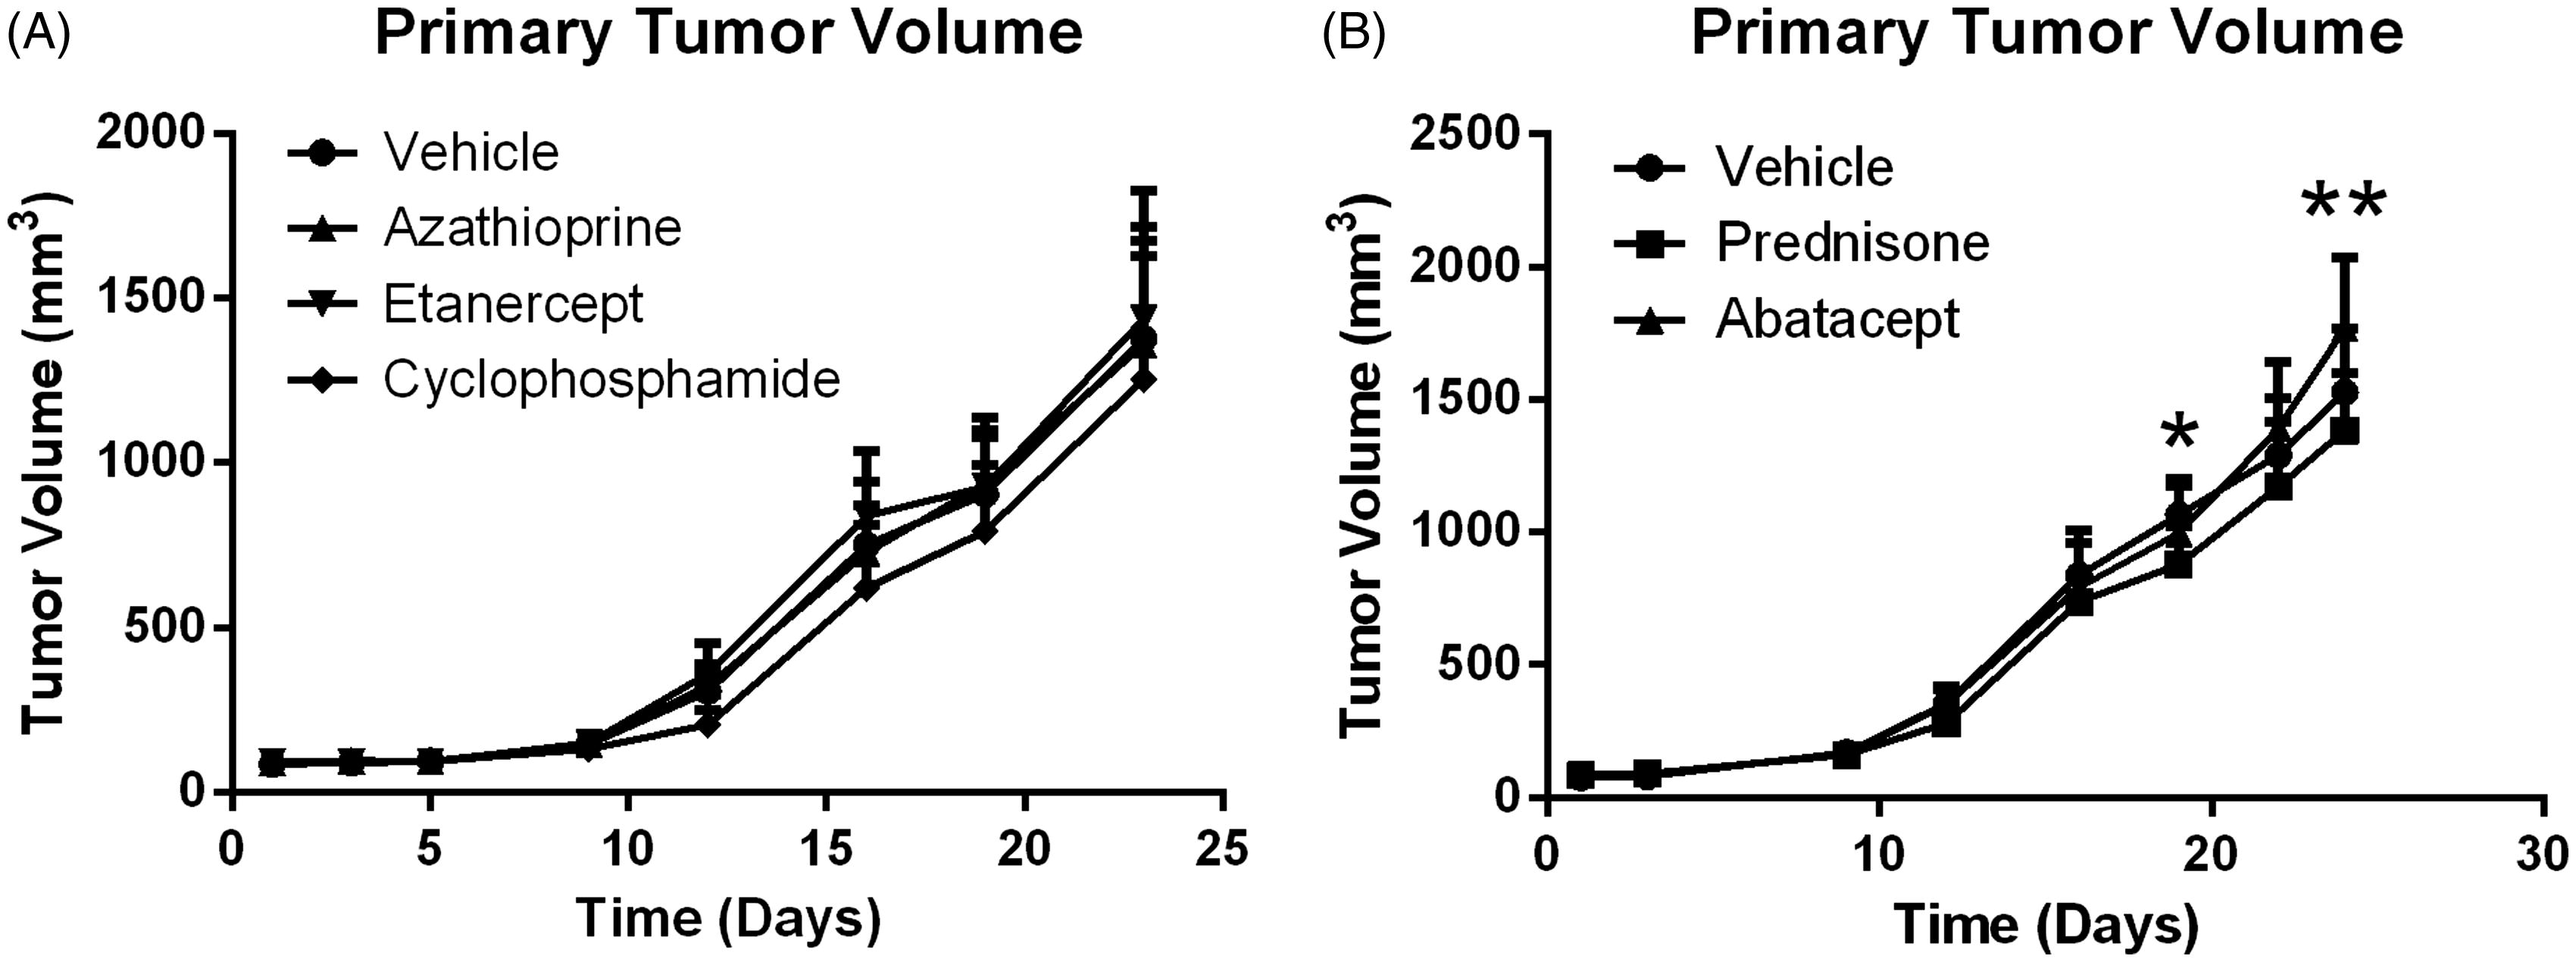 Figure 2. Primary tumor volume increases over time with and without treatment. Data shown are mean ± SD. *At Day 19, Prednisone is significantly less than vehicle control (p < 0.05); n = 12/group. **At Day 24, Prednisone is statistically less than vehicle control and Abatacept is significantly greater than control (p < 0.05); n = 12/group.